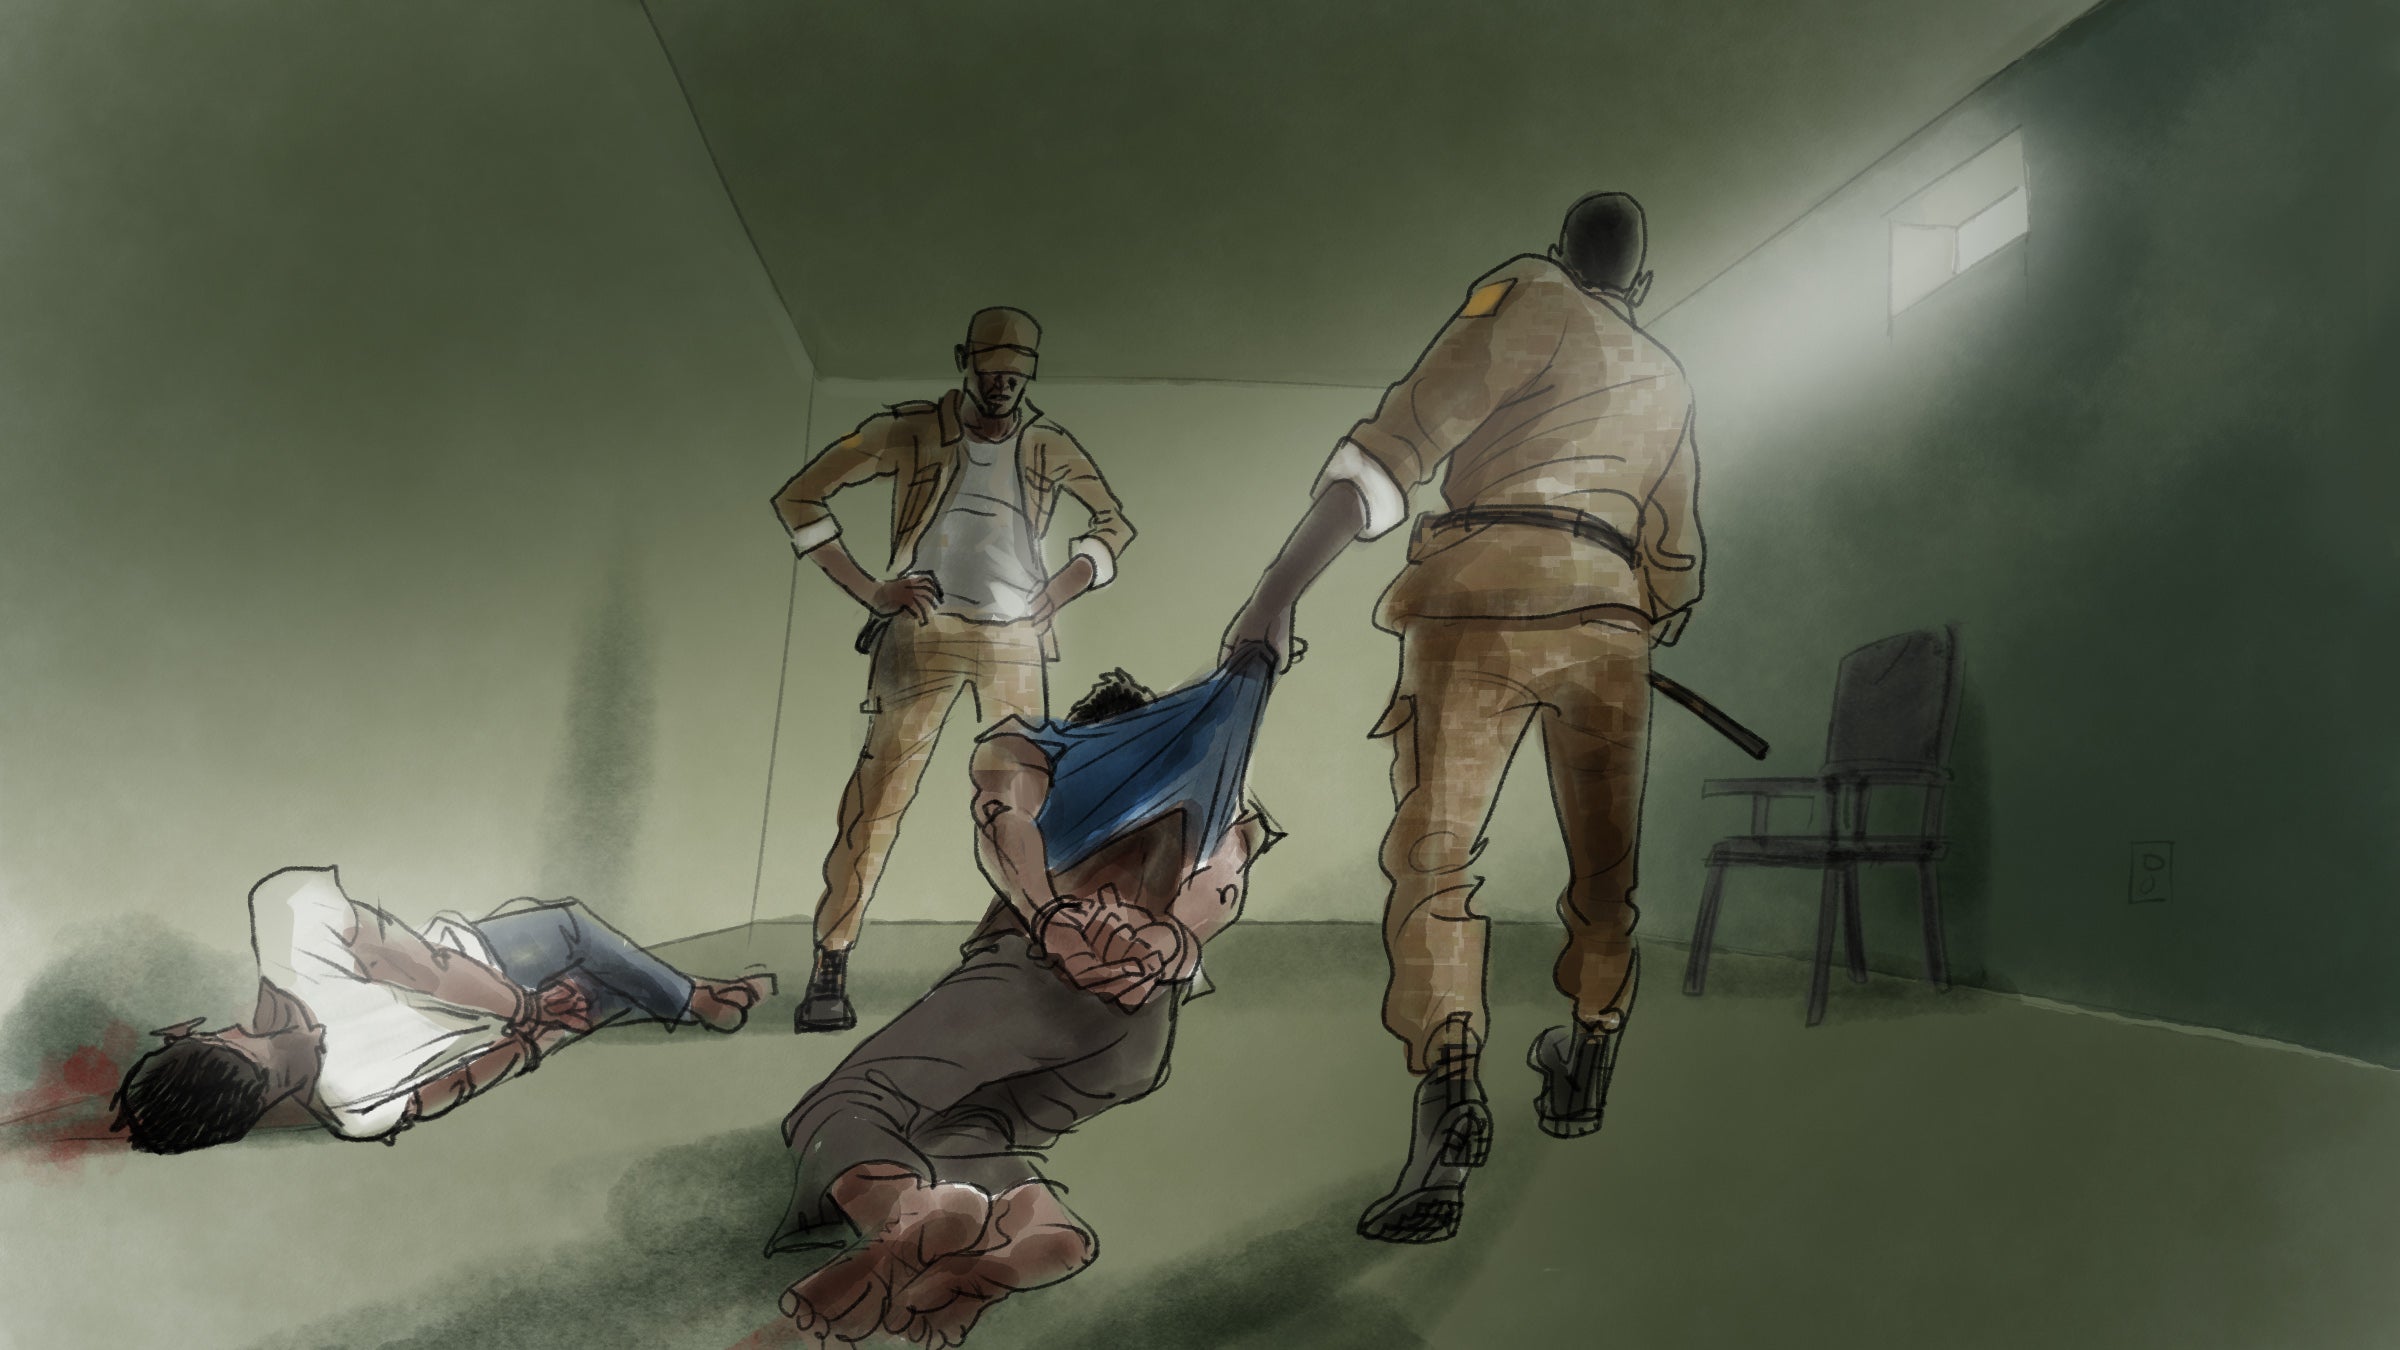 Illustration of armed guards dragging a detainee while another lies injured on the floor